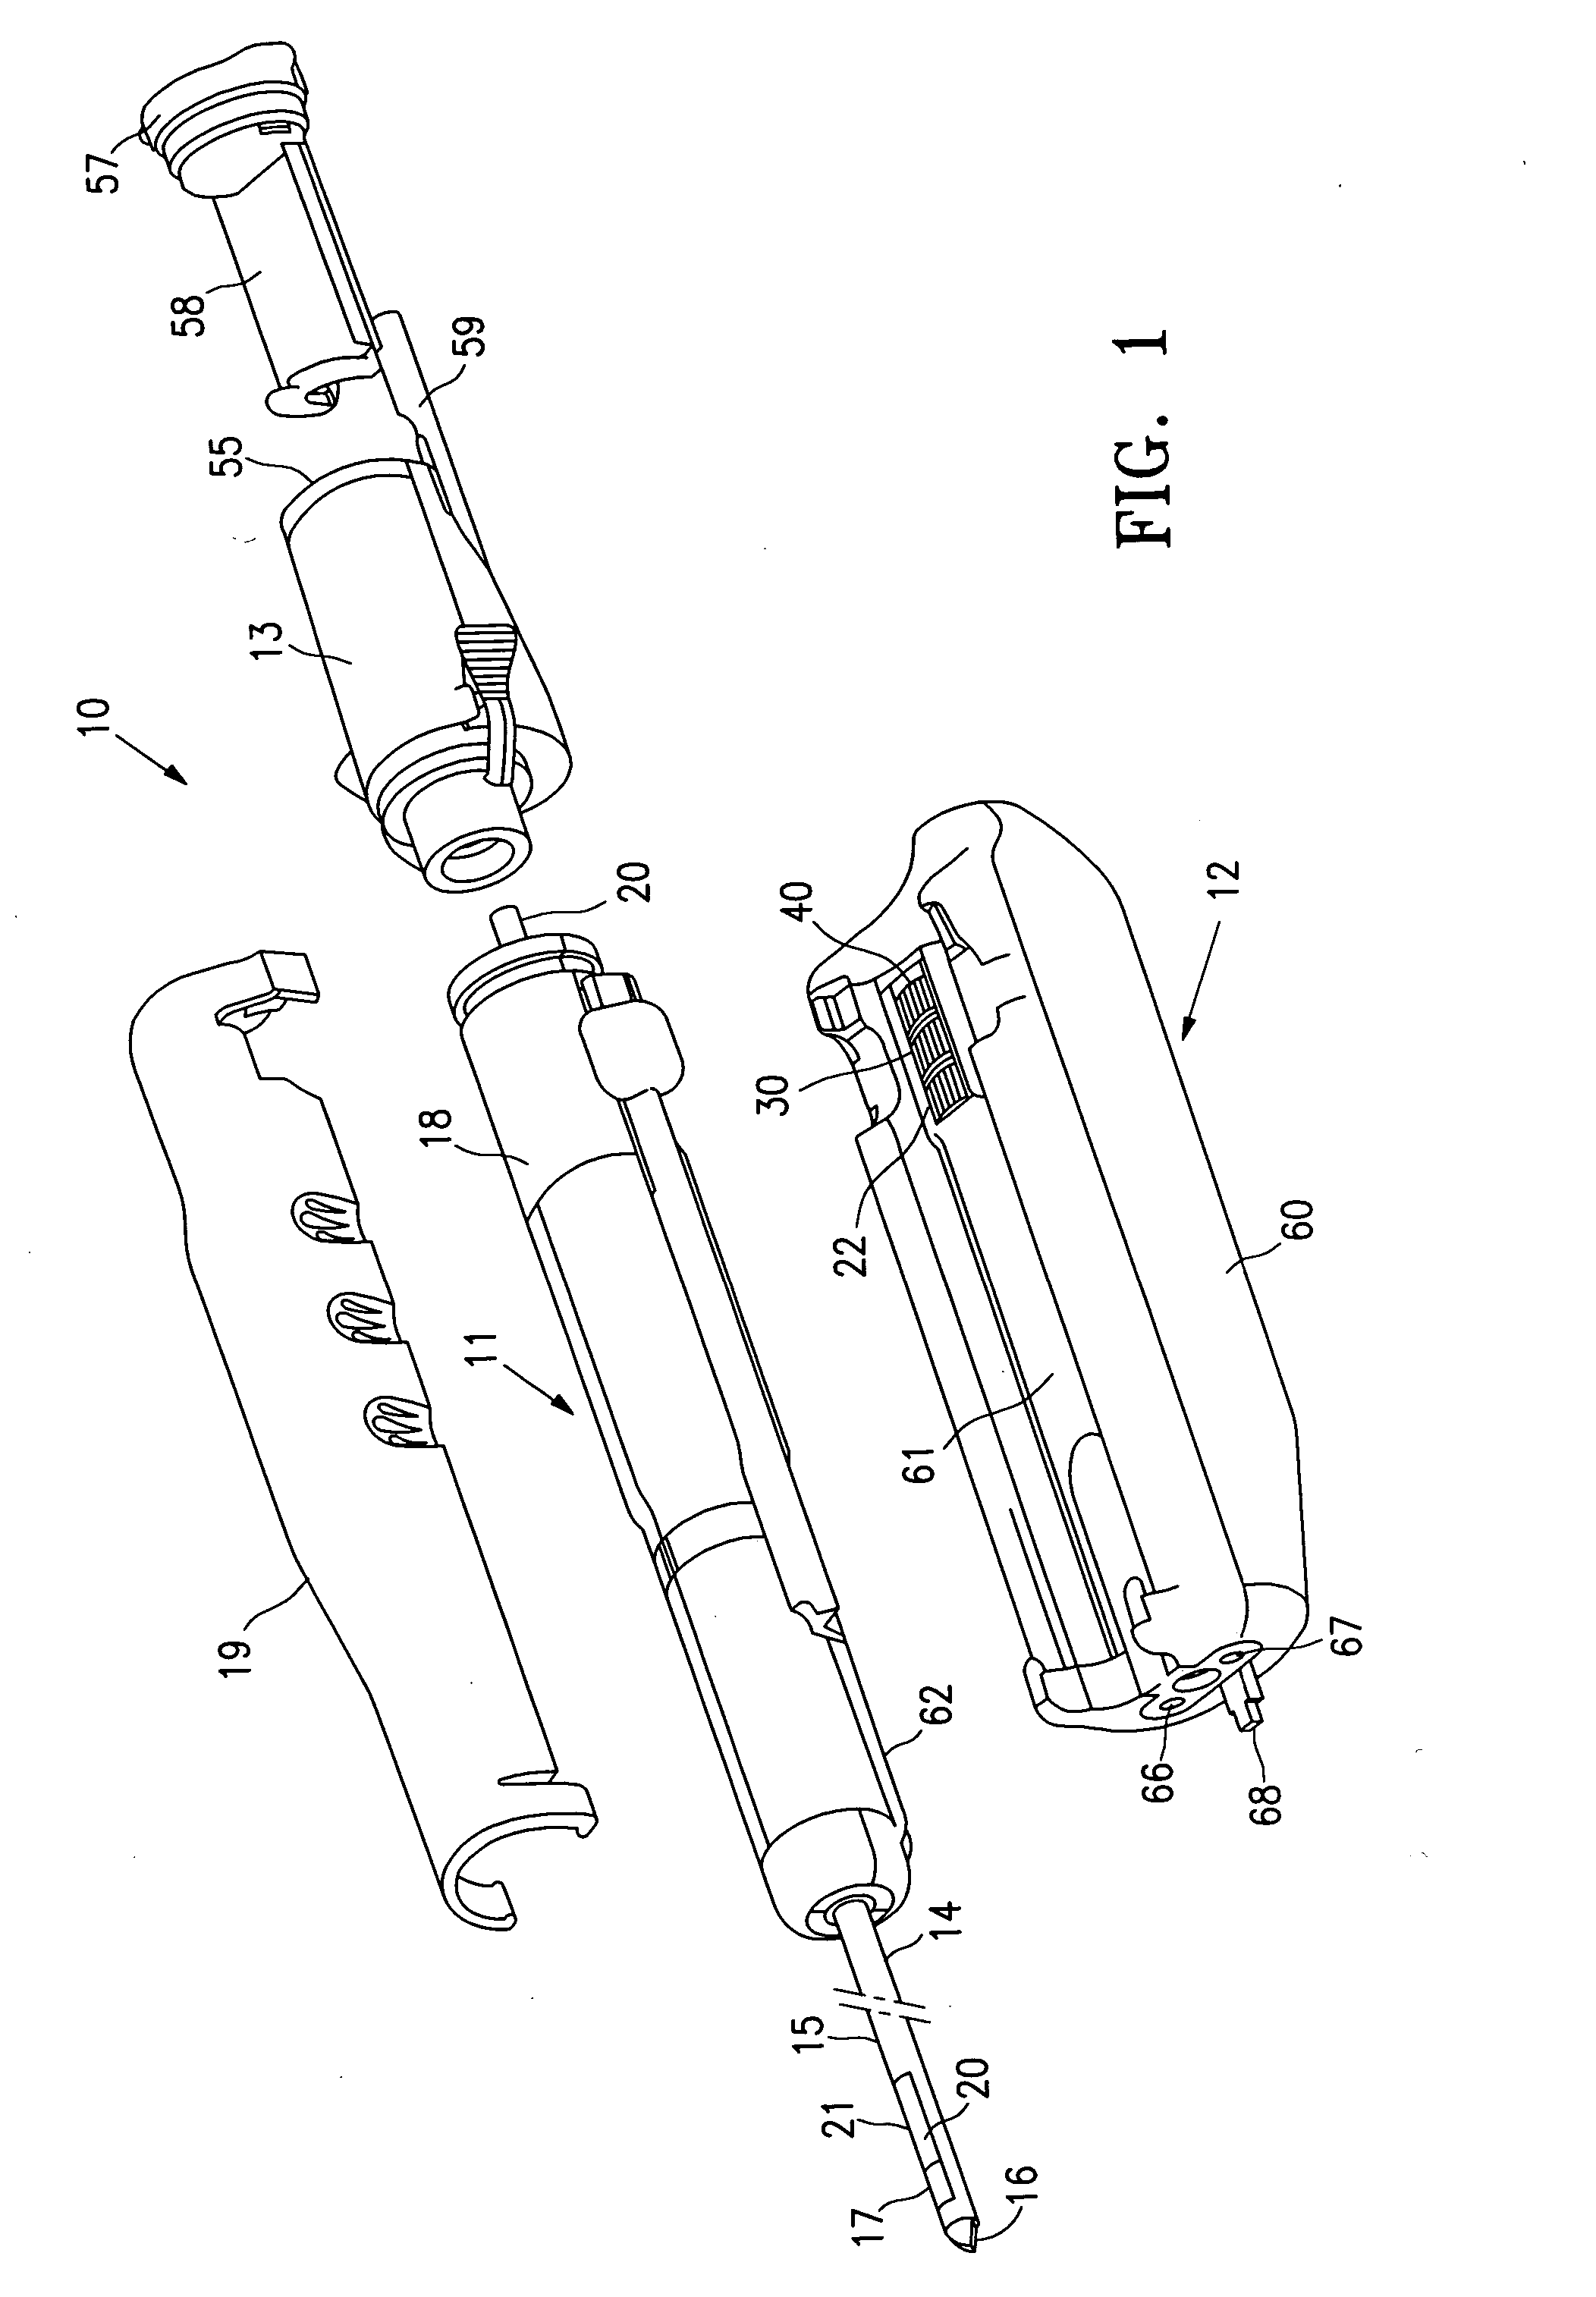 Biopsy device with selectable tissue receiving aperture orientation and site illumination